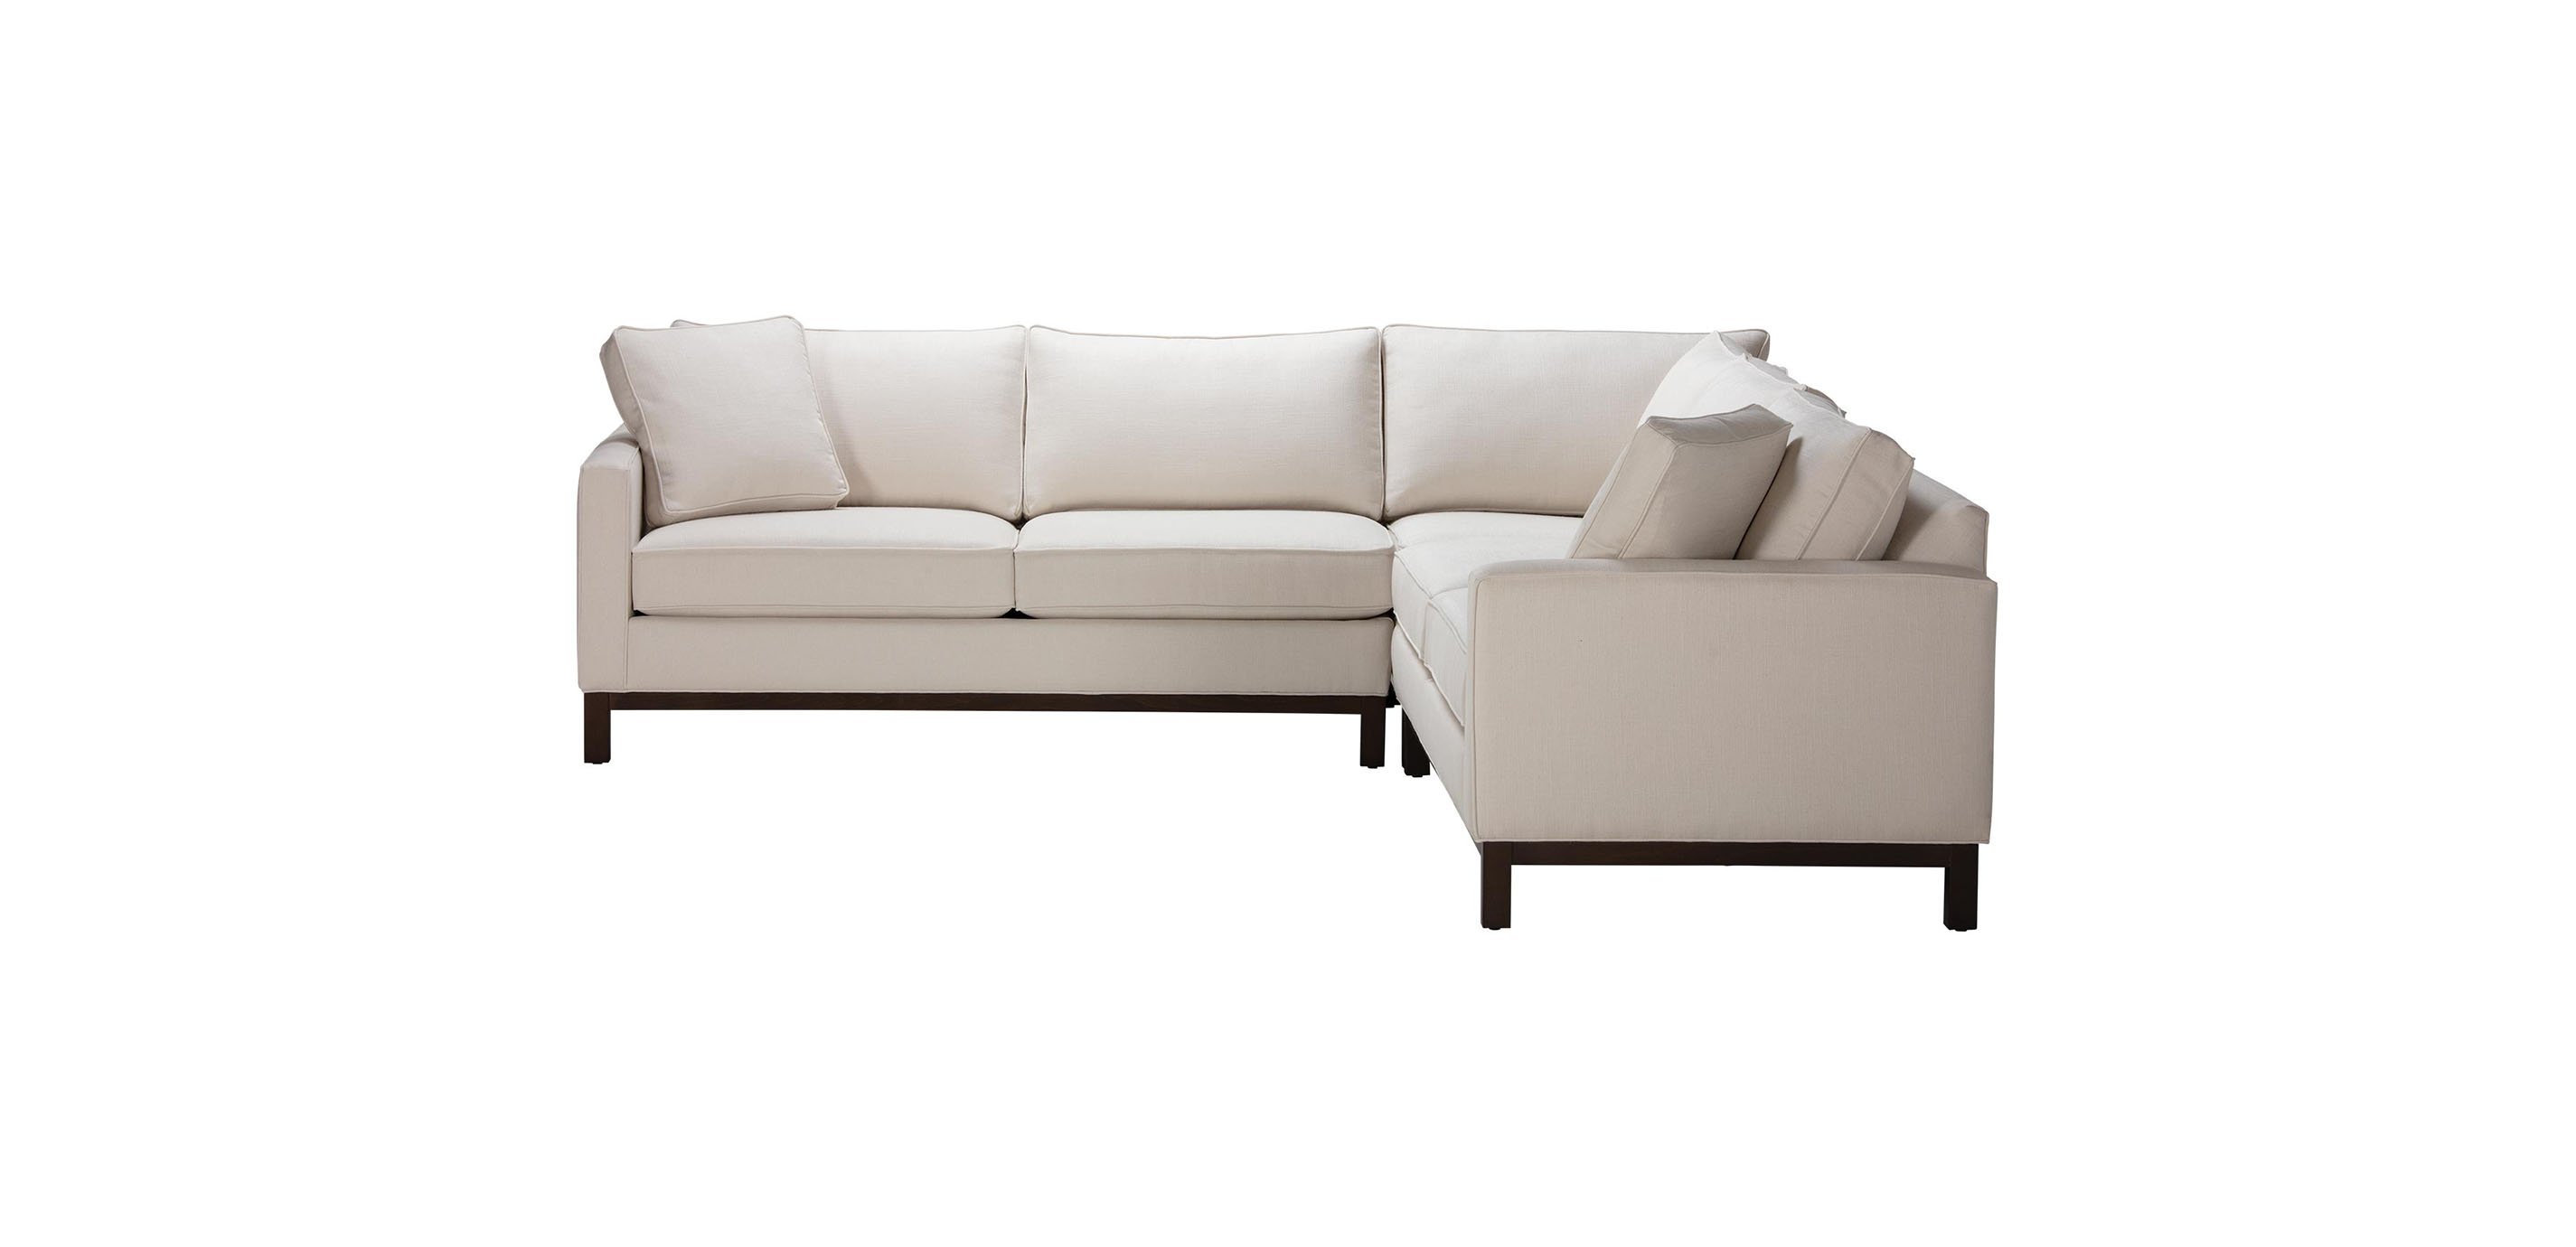 Melrose Too Three Piece Sectional